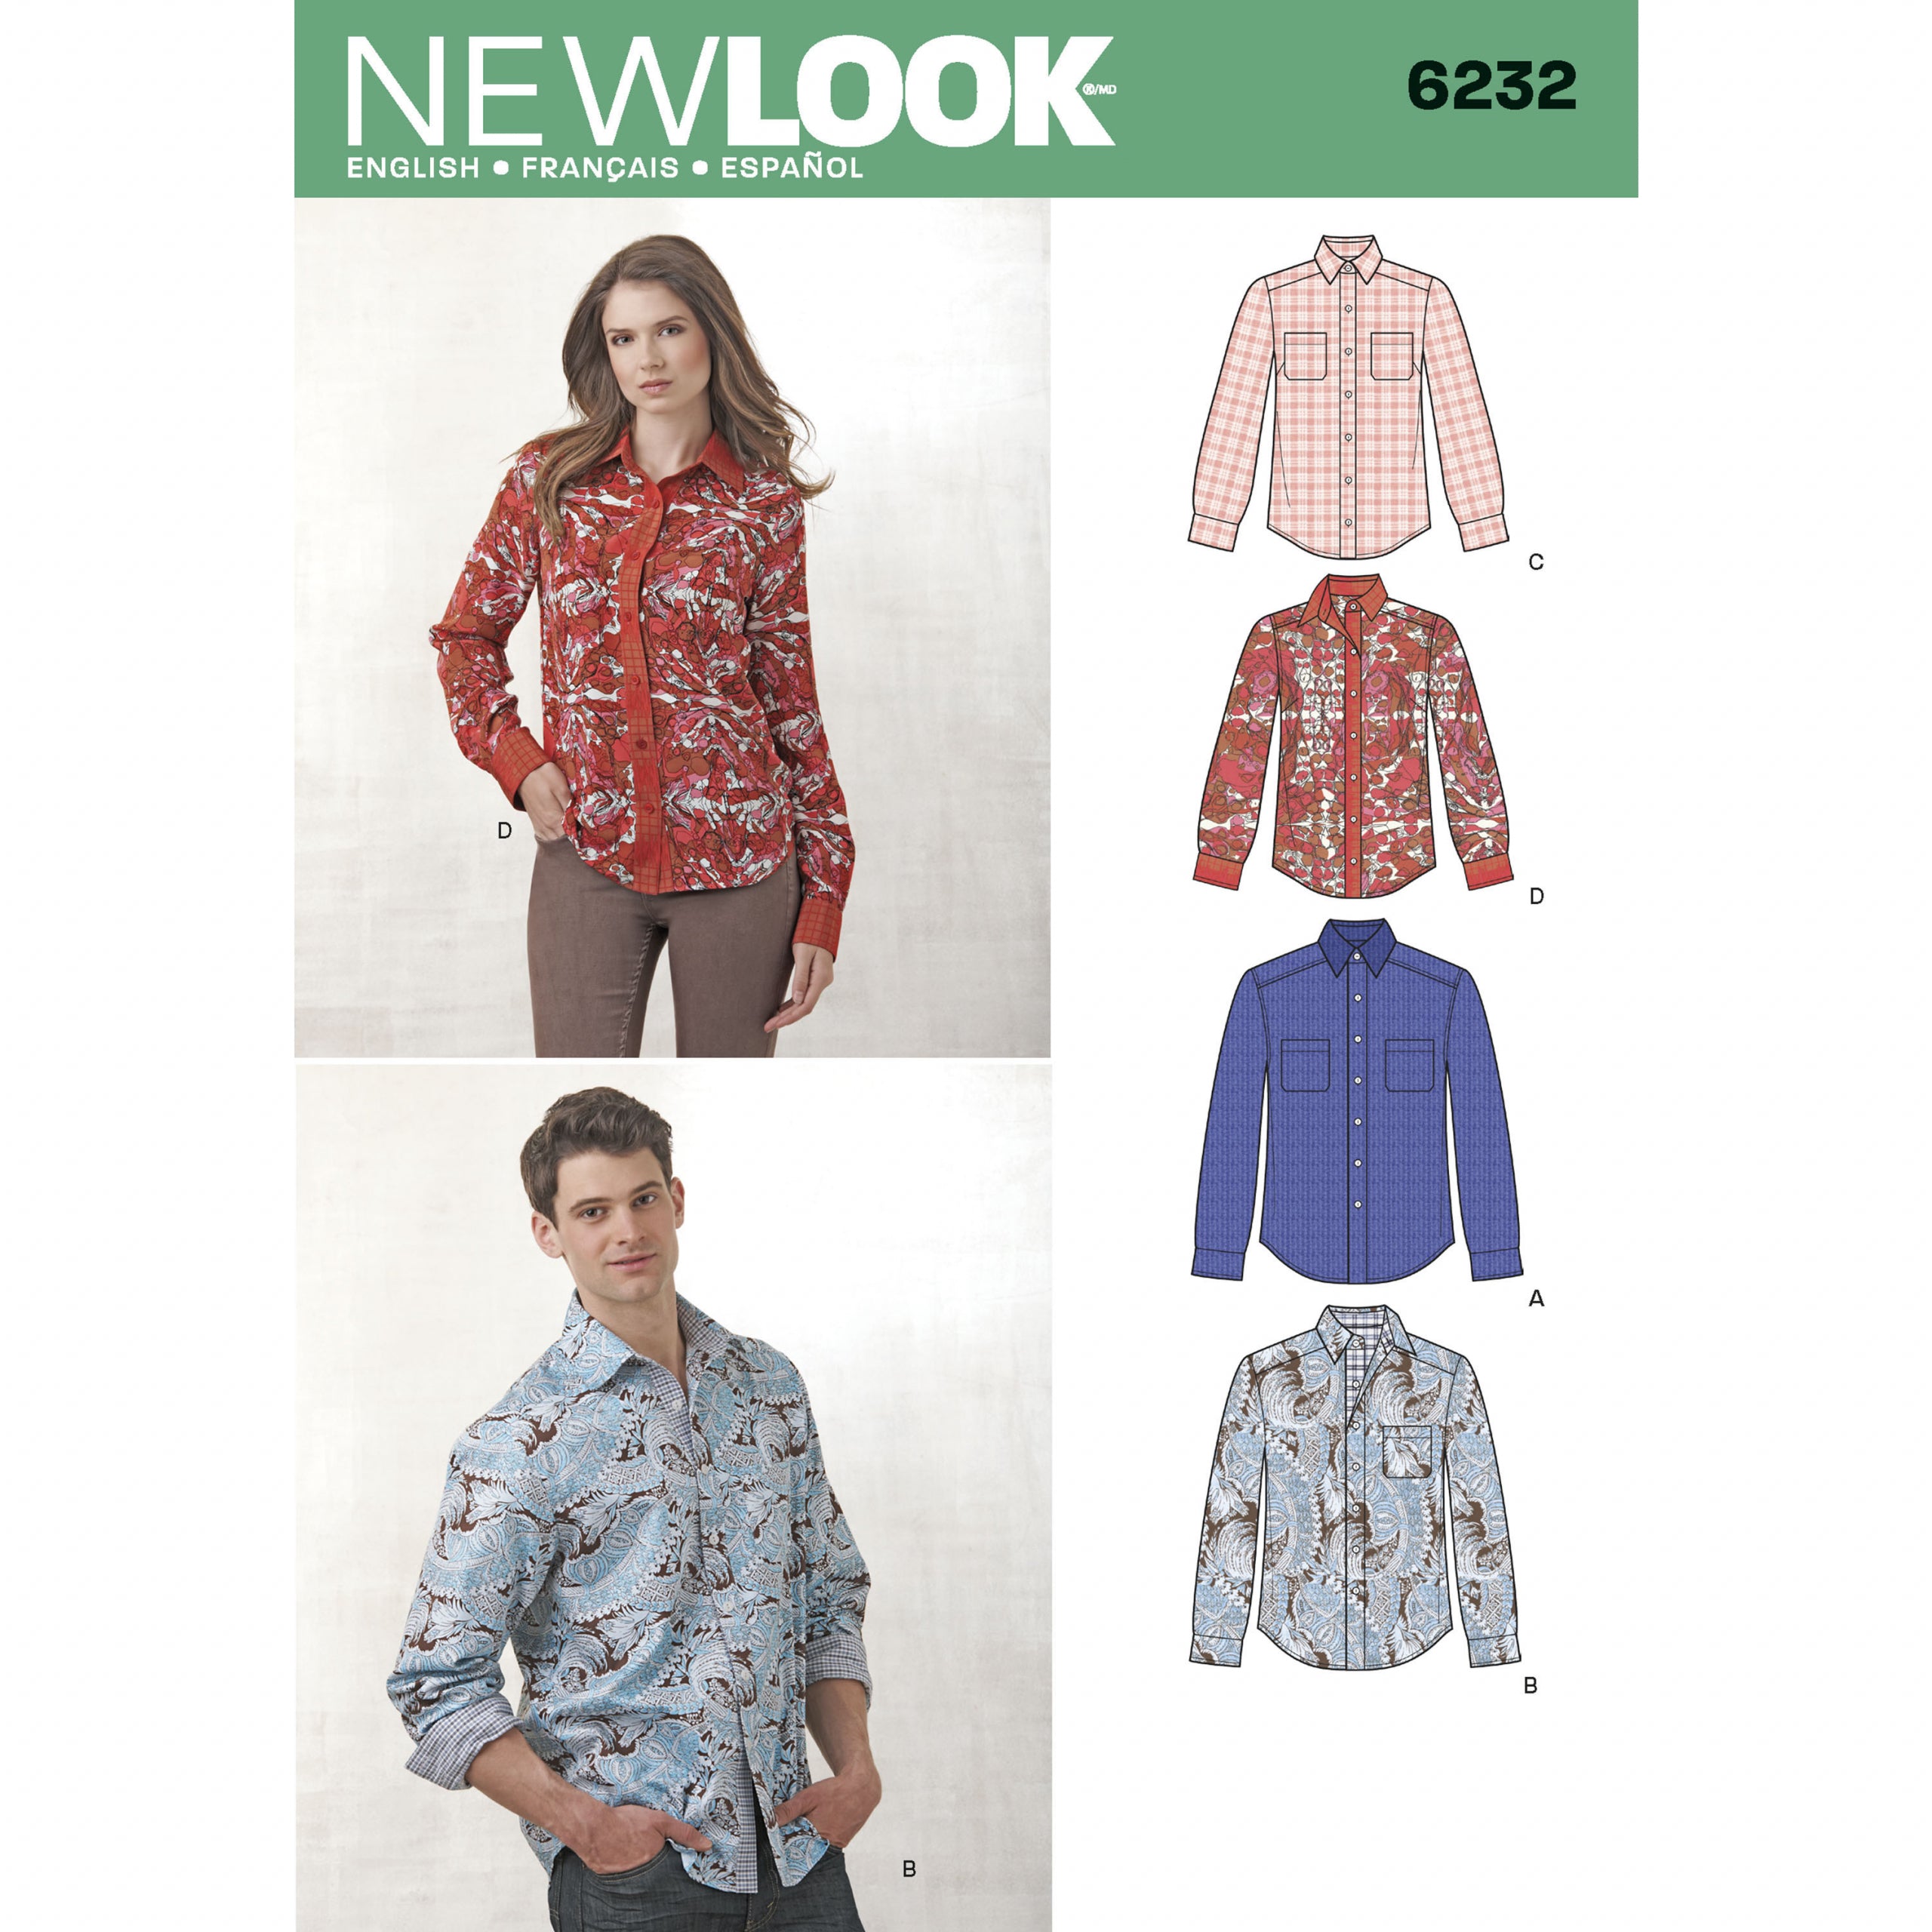 New Look 6232 Misses' and Men's Shirts sewing pattern from Jaycotts Sewing Supplies